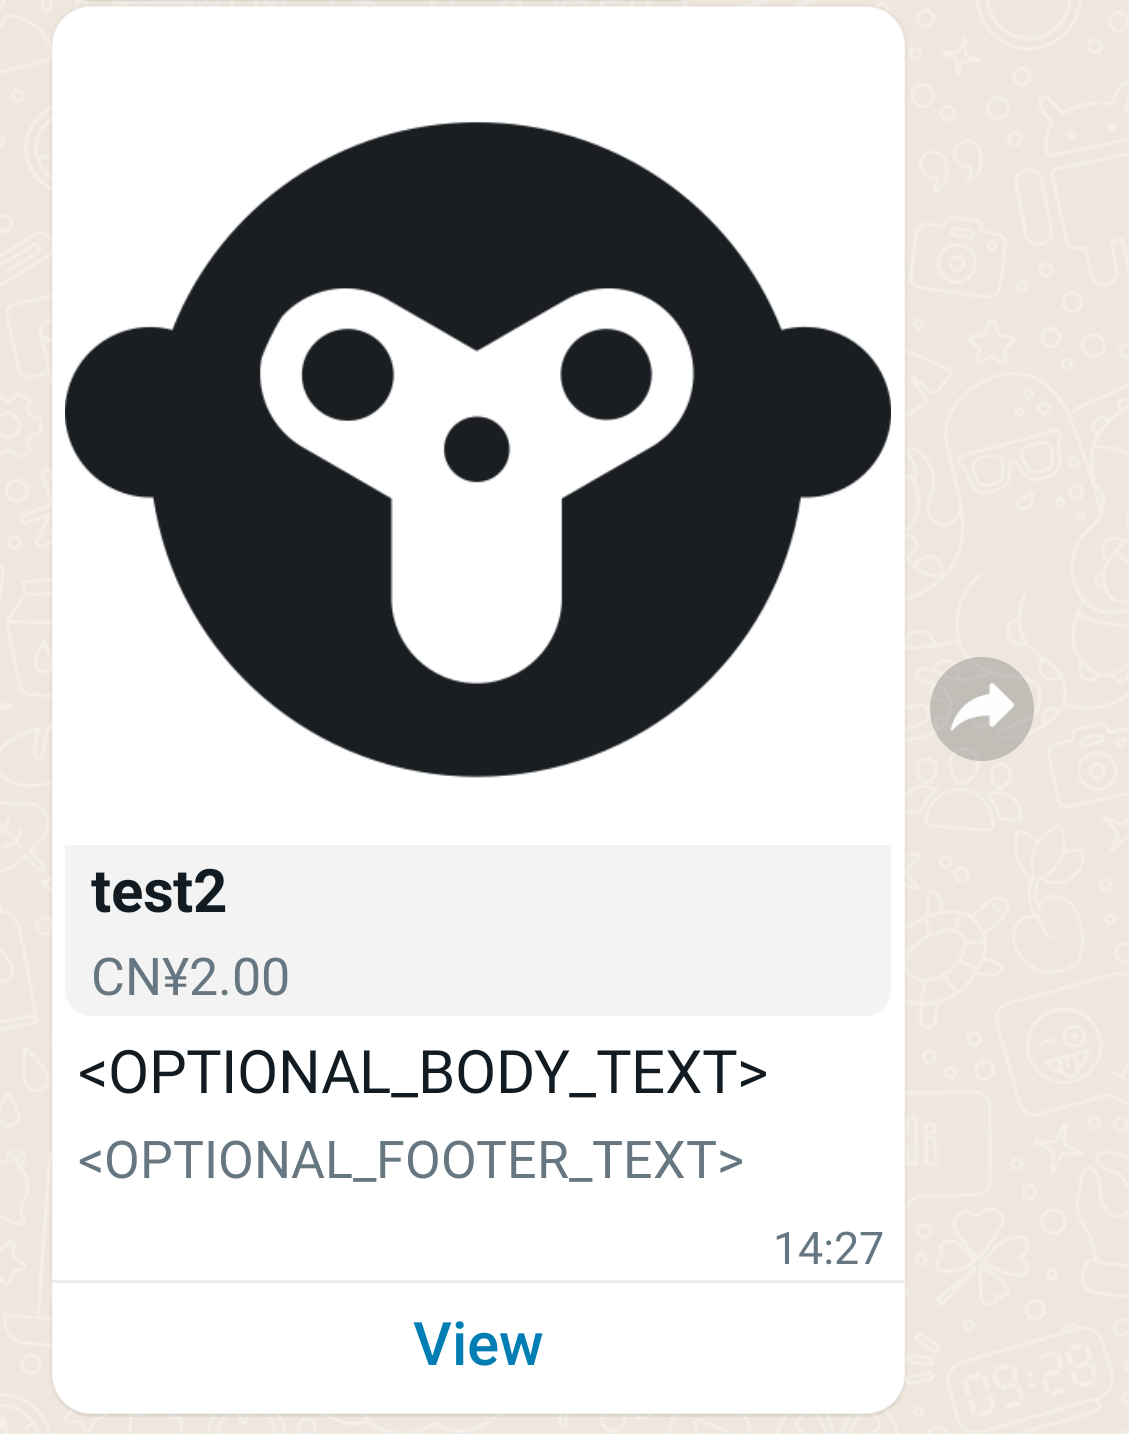 example-messaging-product.png